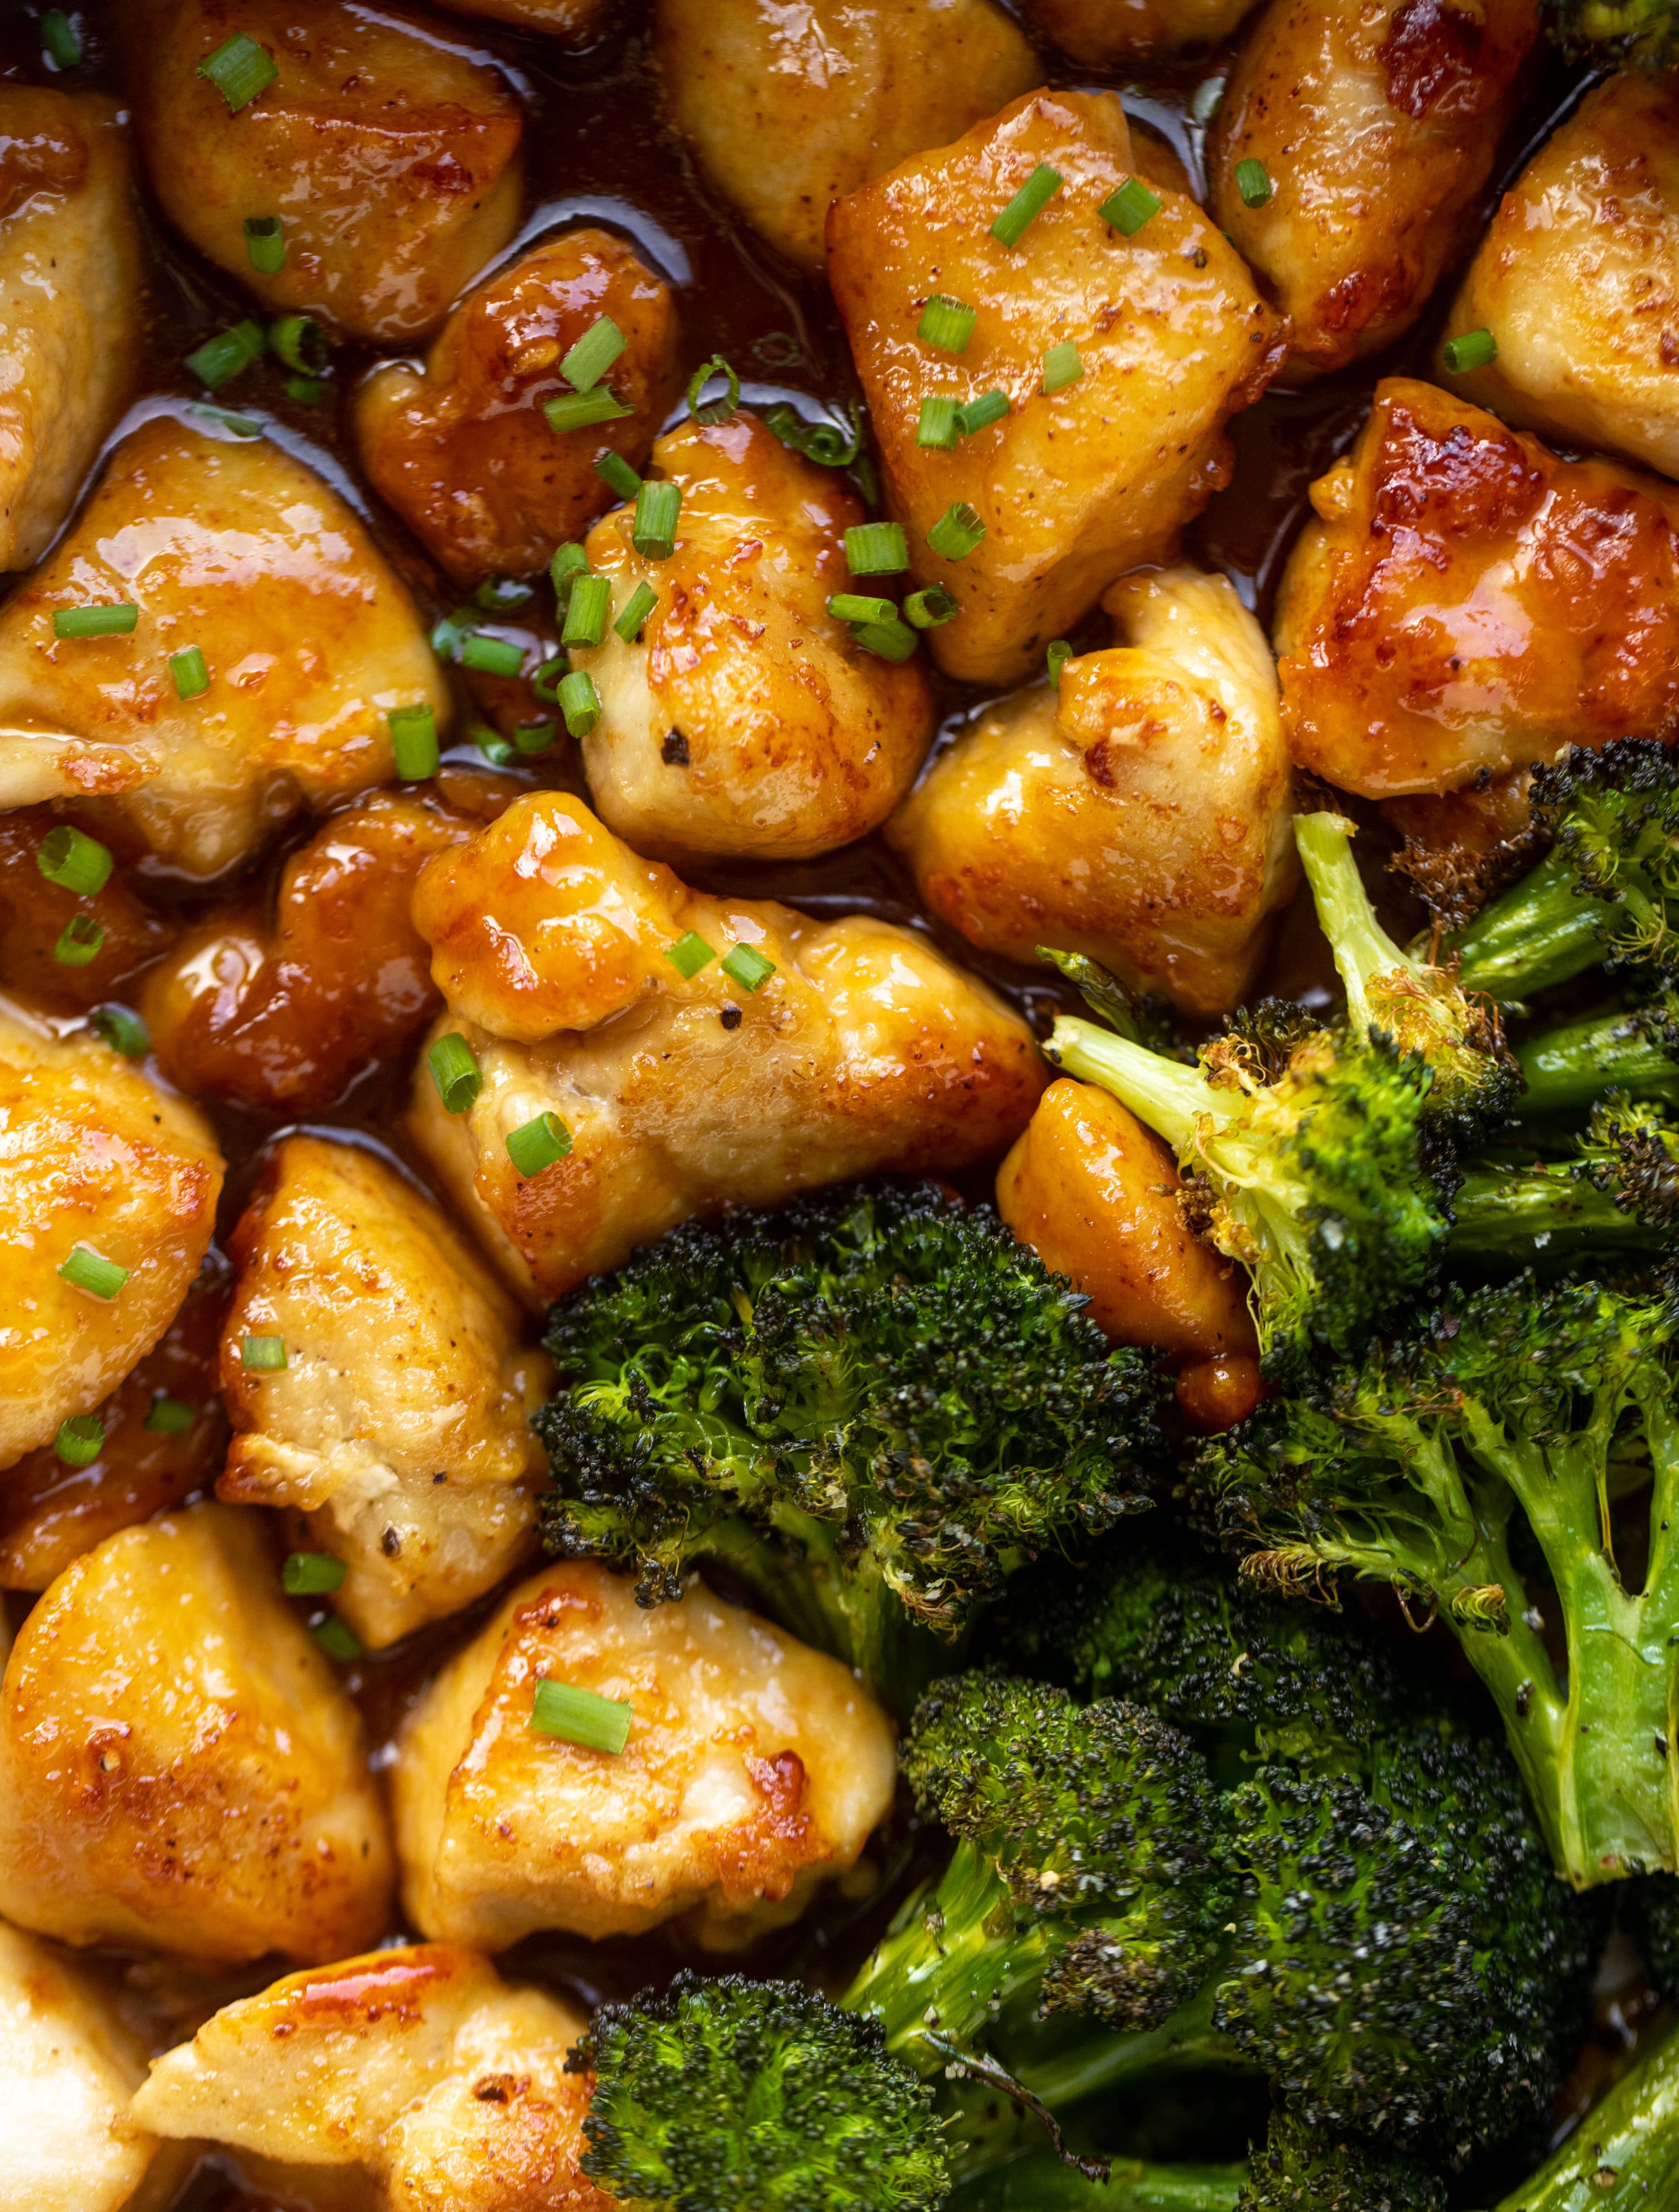 This sticky apricot chicken is so juicy and delicious! The chicken is seared and glazed with a jammy apricot sauce. Serve with broccoli and rice!